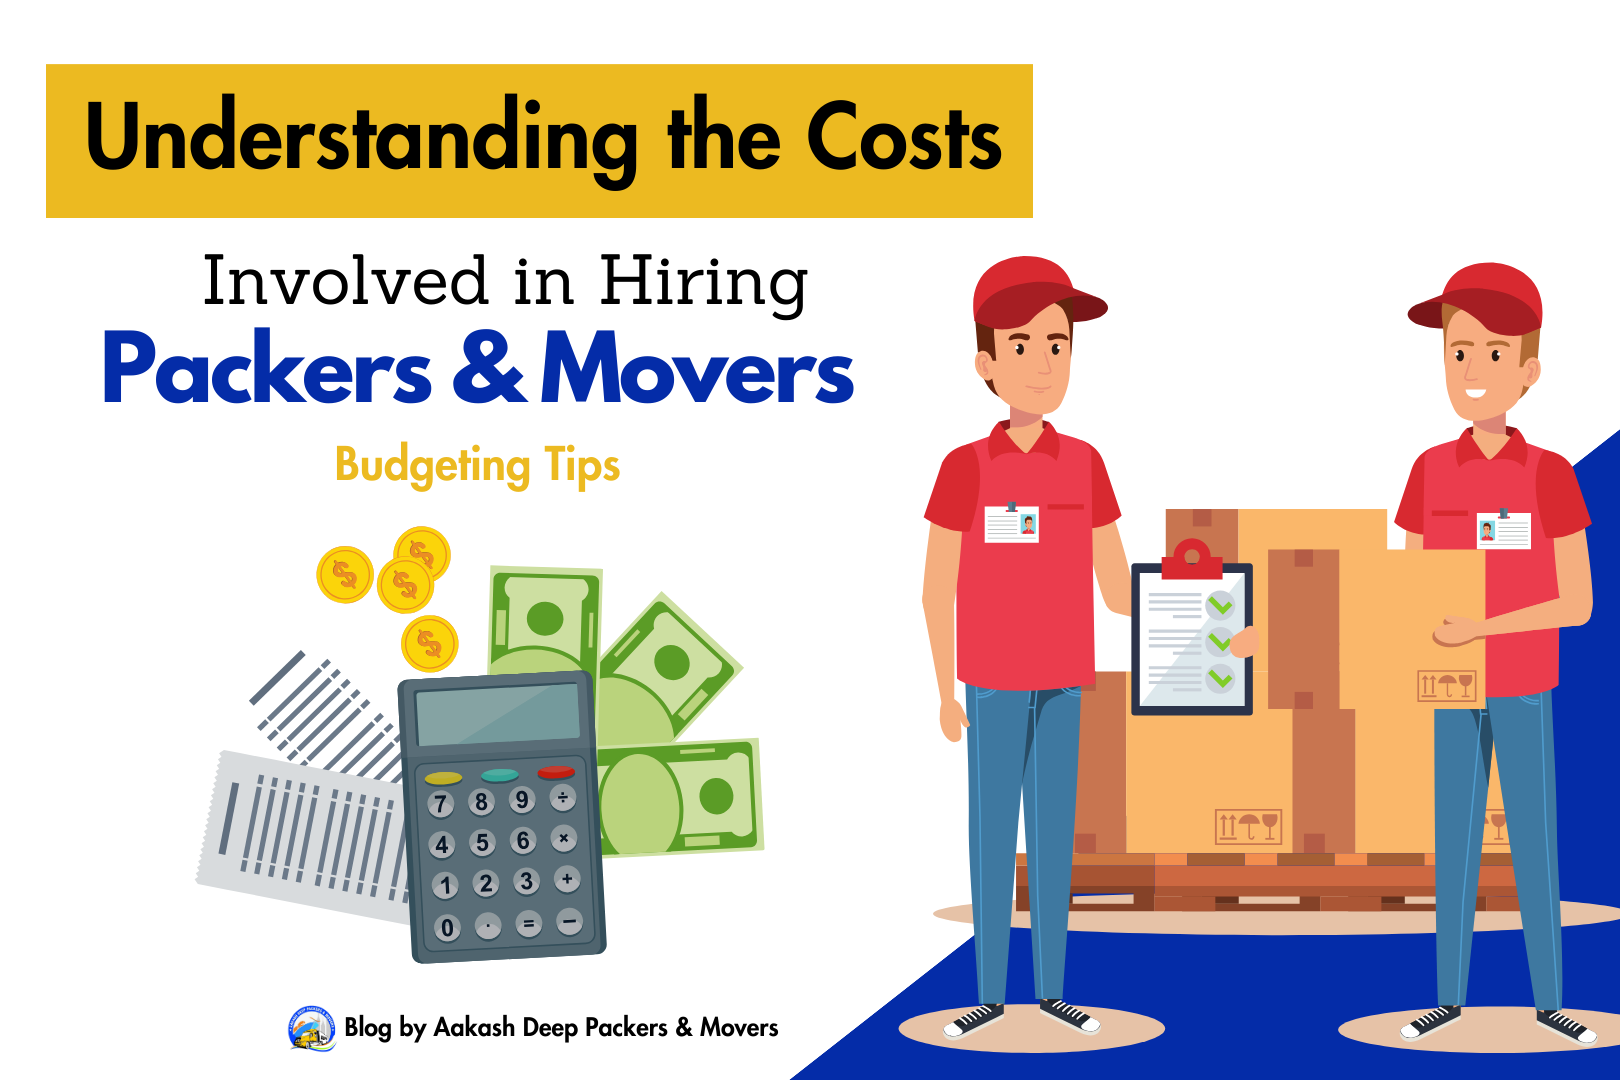  Understanding the Costs Involved in Hiring Packers and Movers: Budgeting Tips